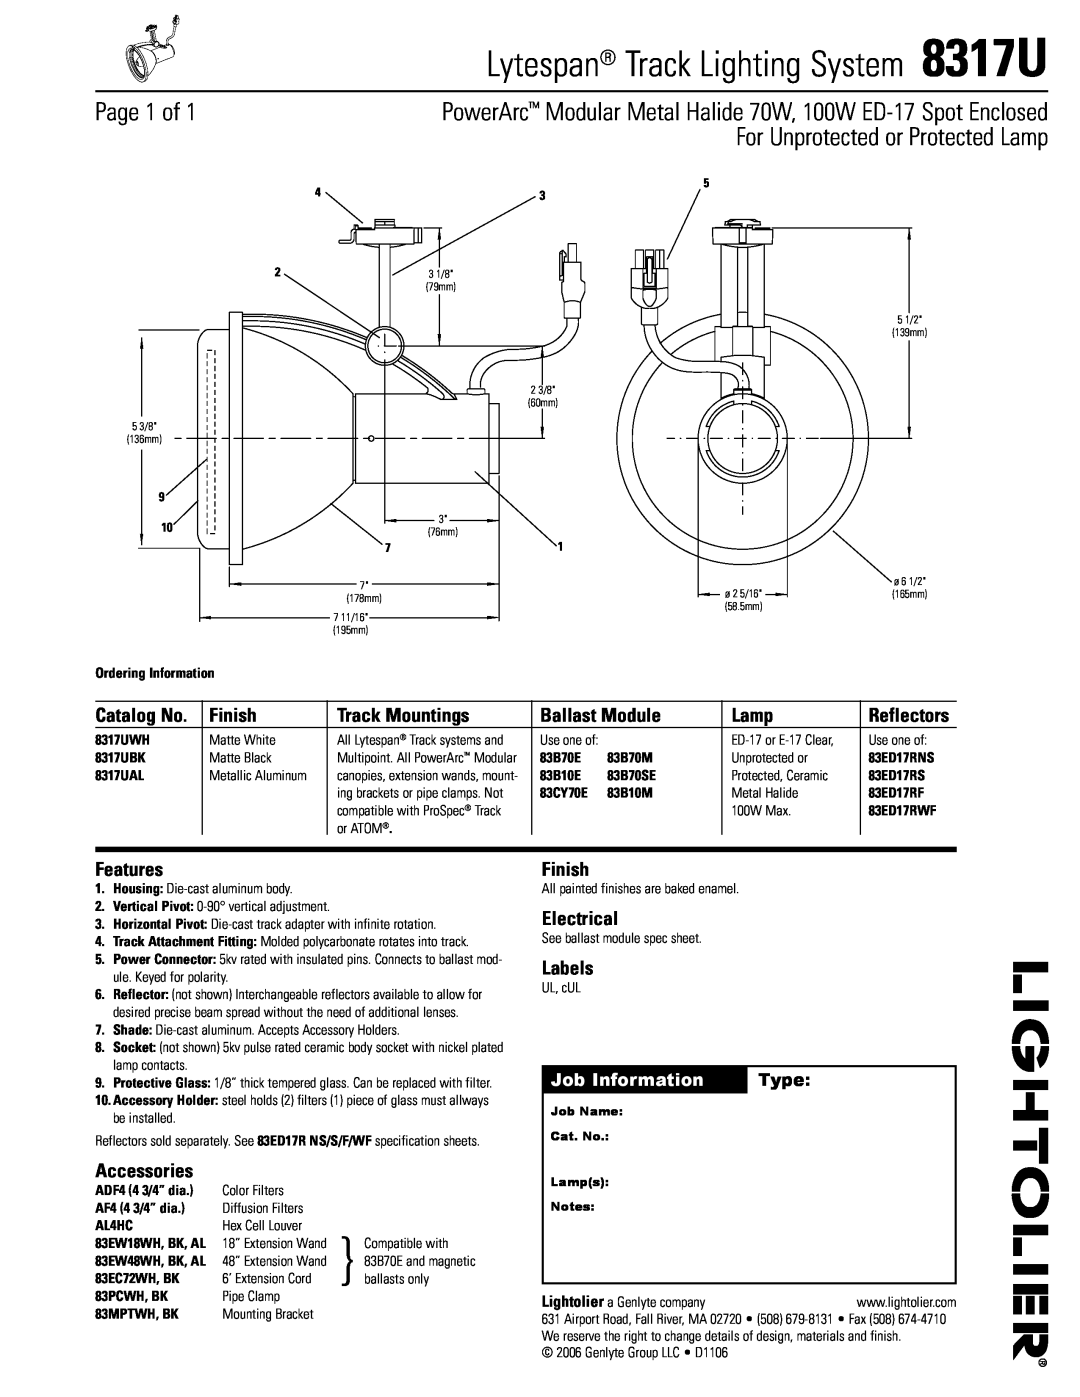 Lightolier specifications Lytespan Track Lighting System 8317U, For Unprotected or Protected Lamp, Page 1 of, Finish 